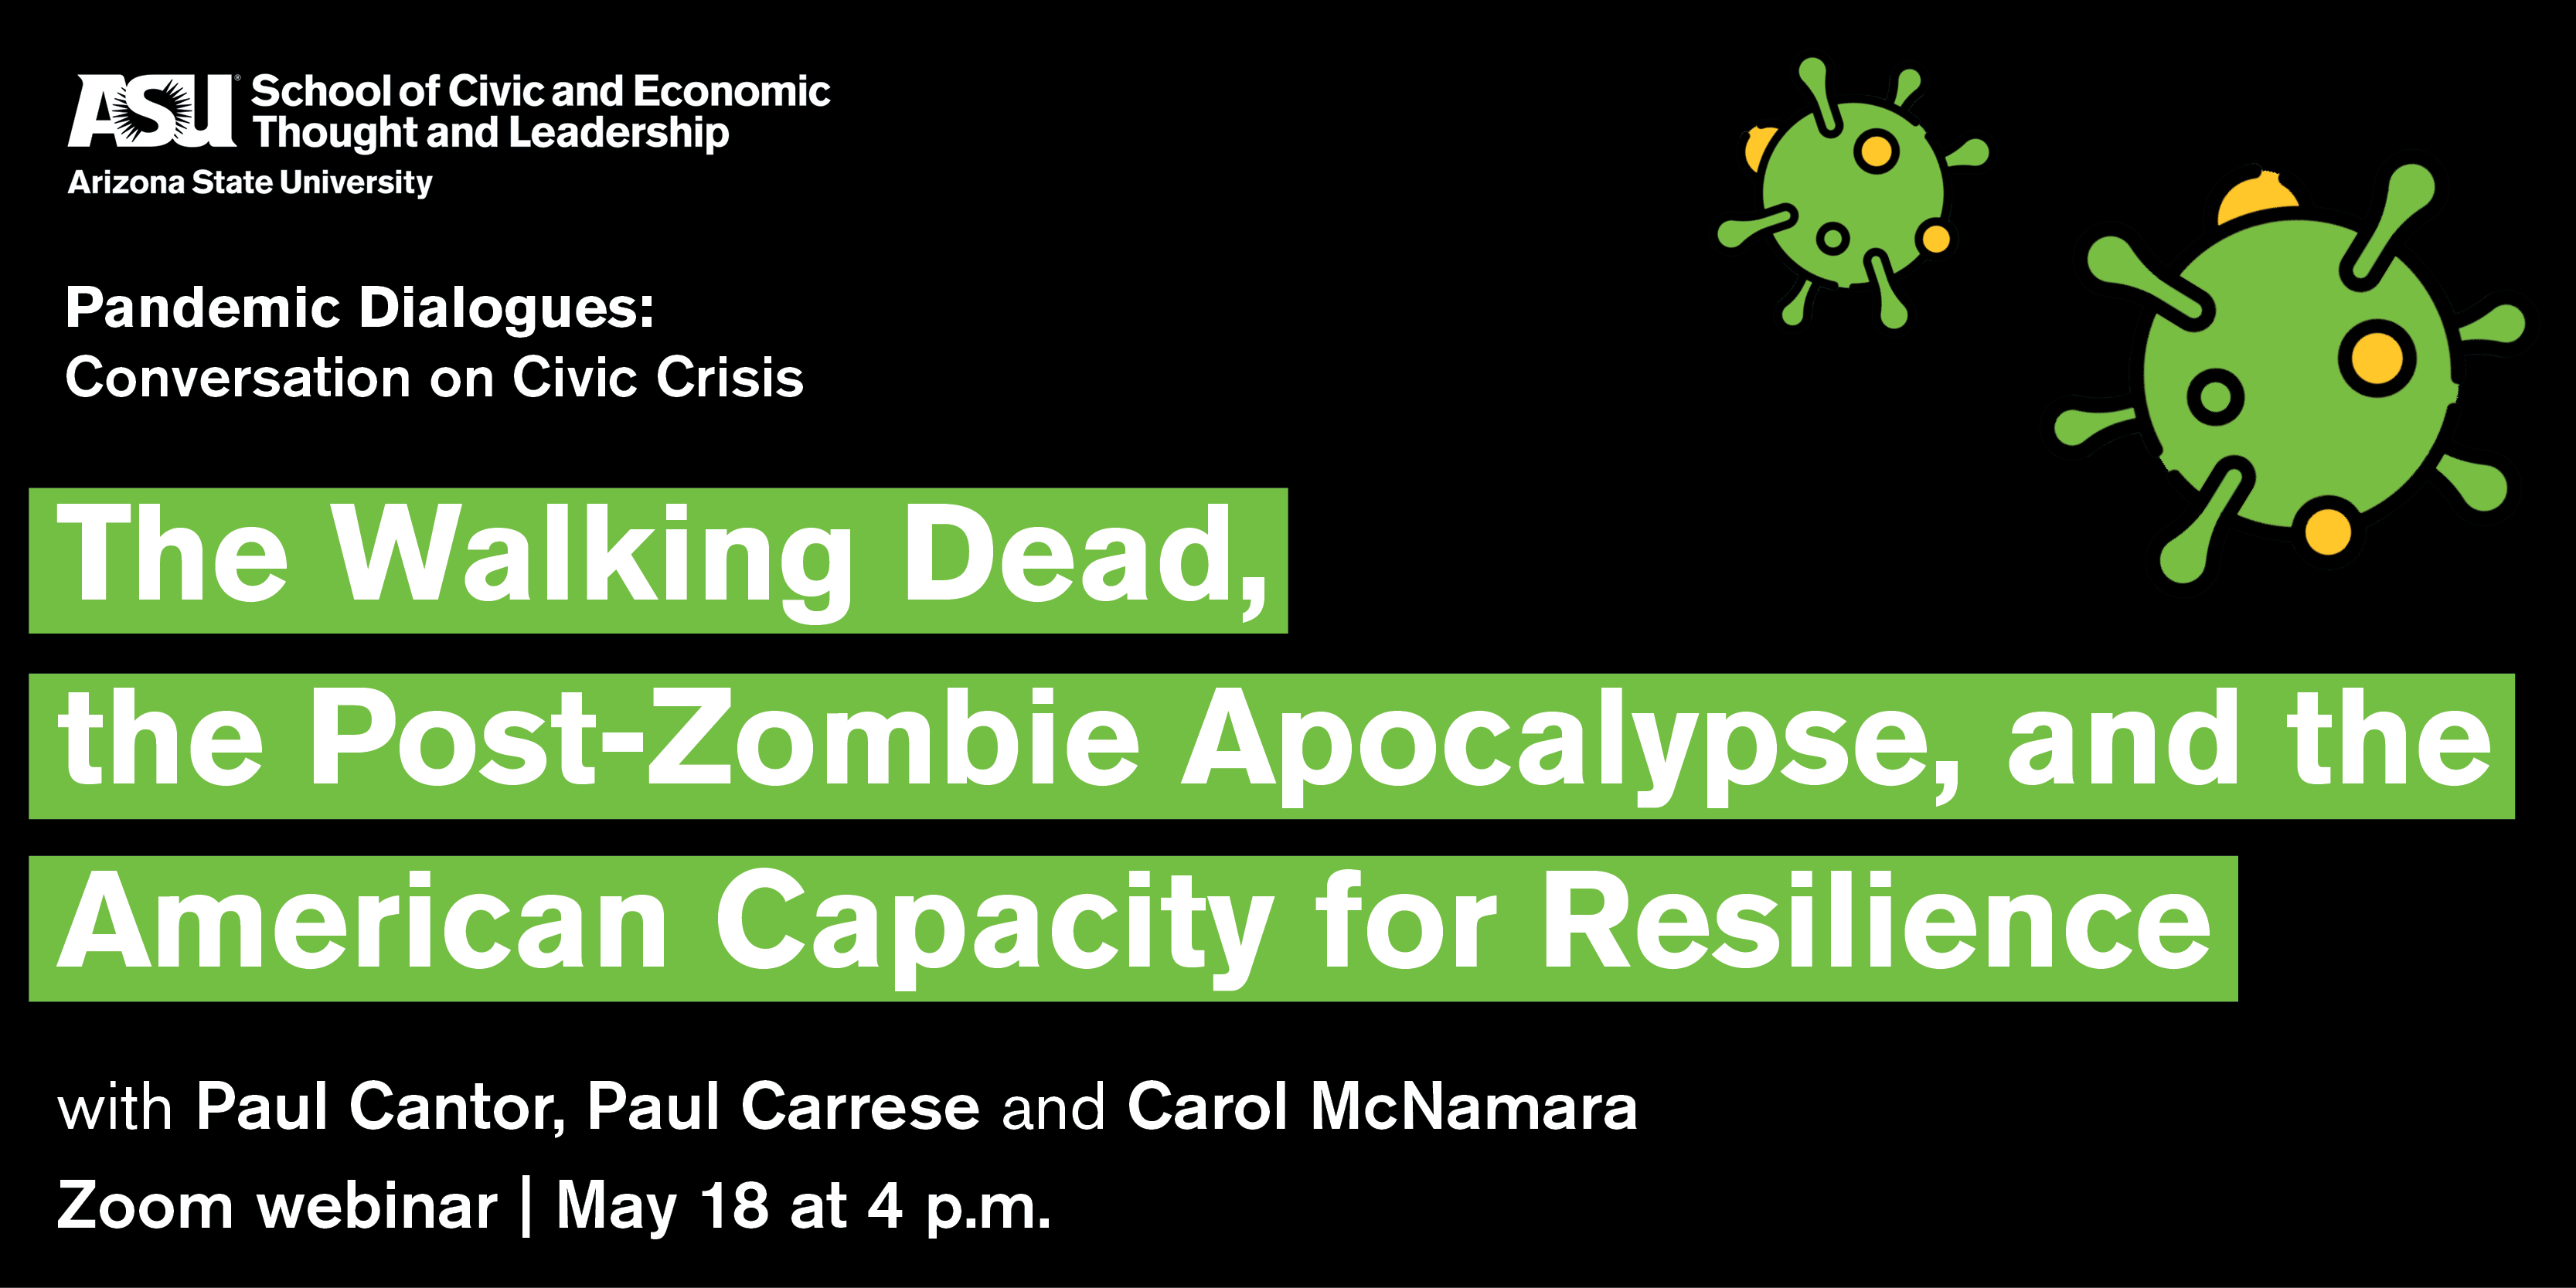 The Walking Dead, the Post-Zombie Apocalypse and the American Capacity for Resilience Webinar